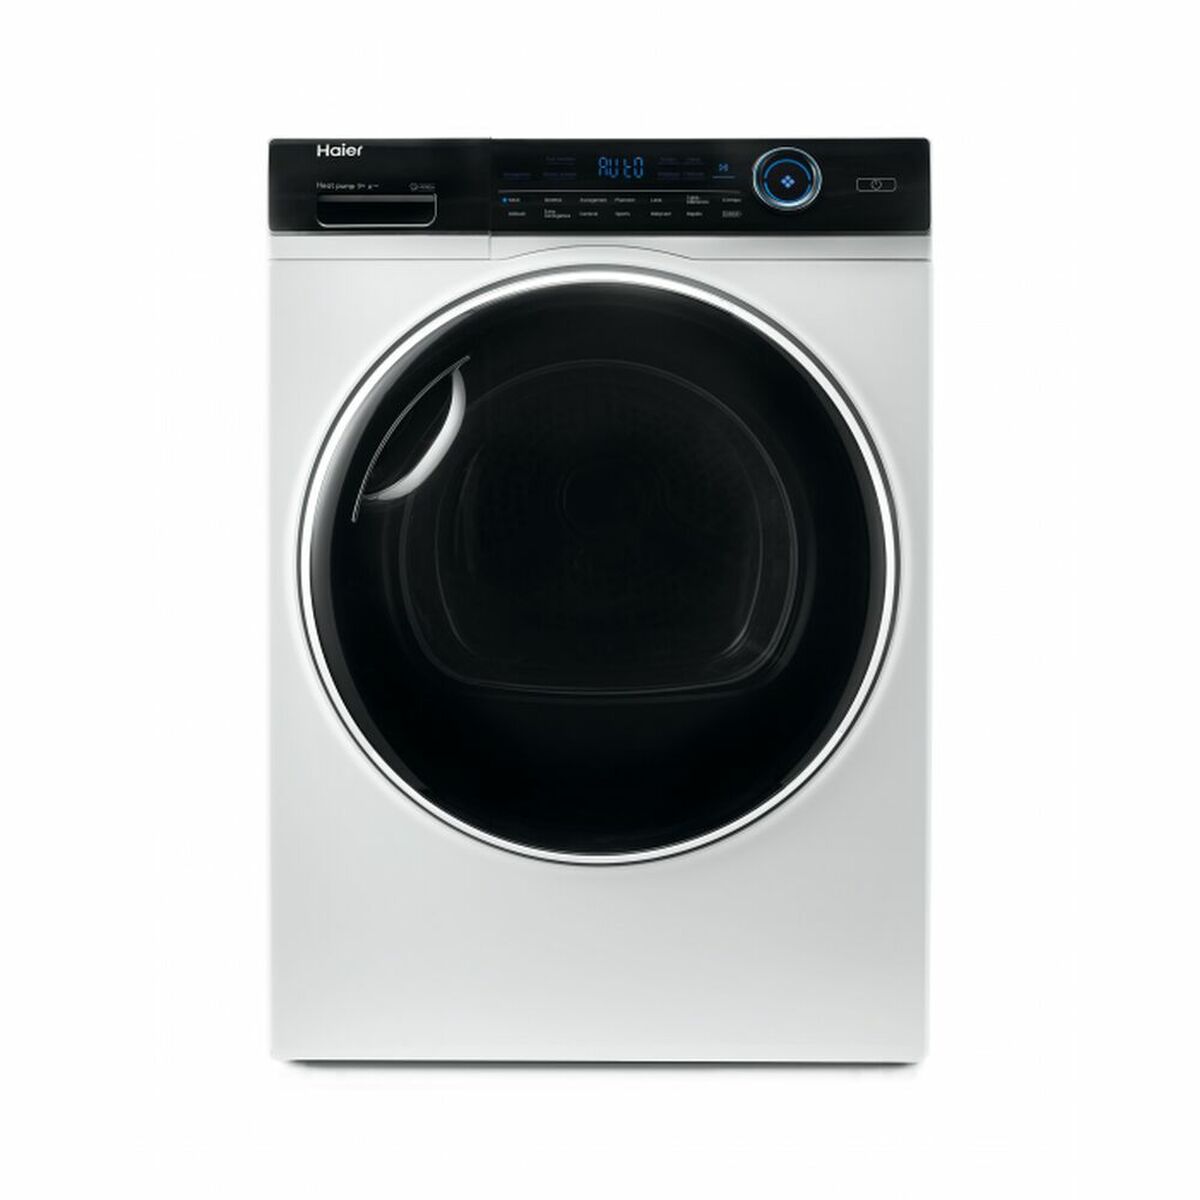 Condensdroger Haier HD90-A3979-S 9 kg Wit